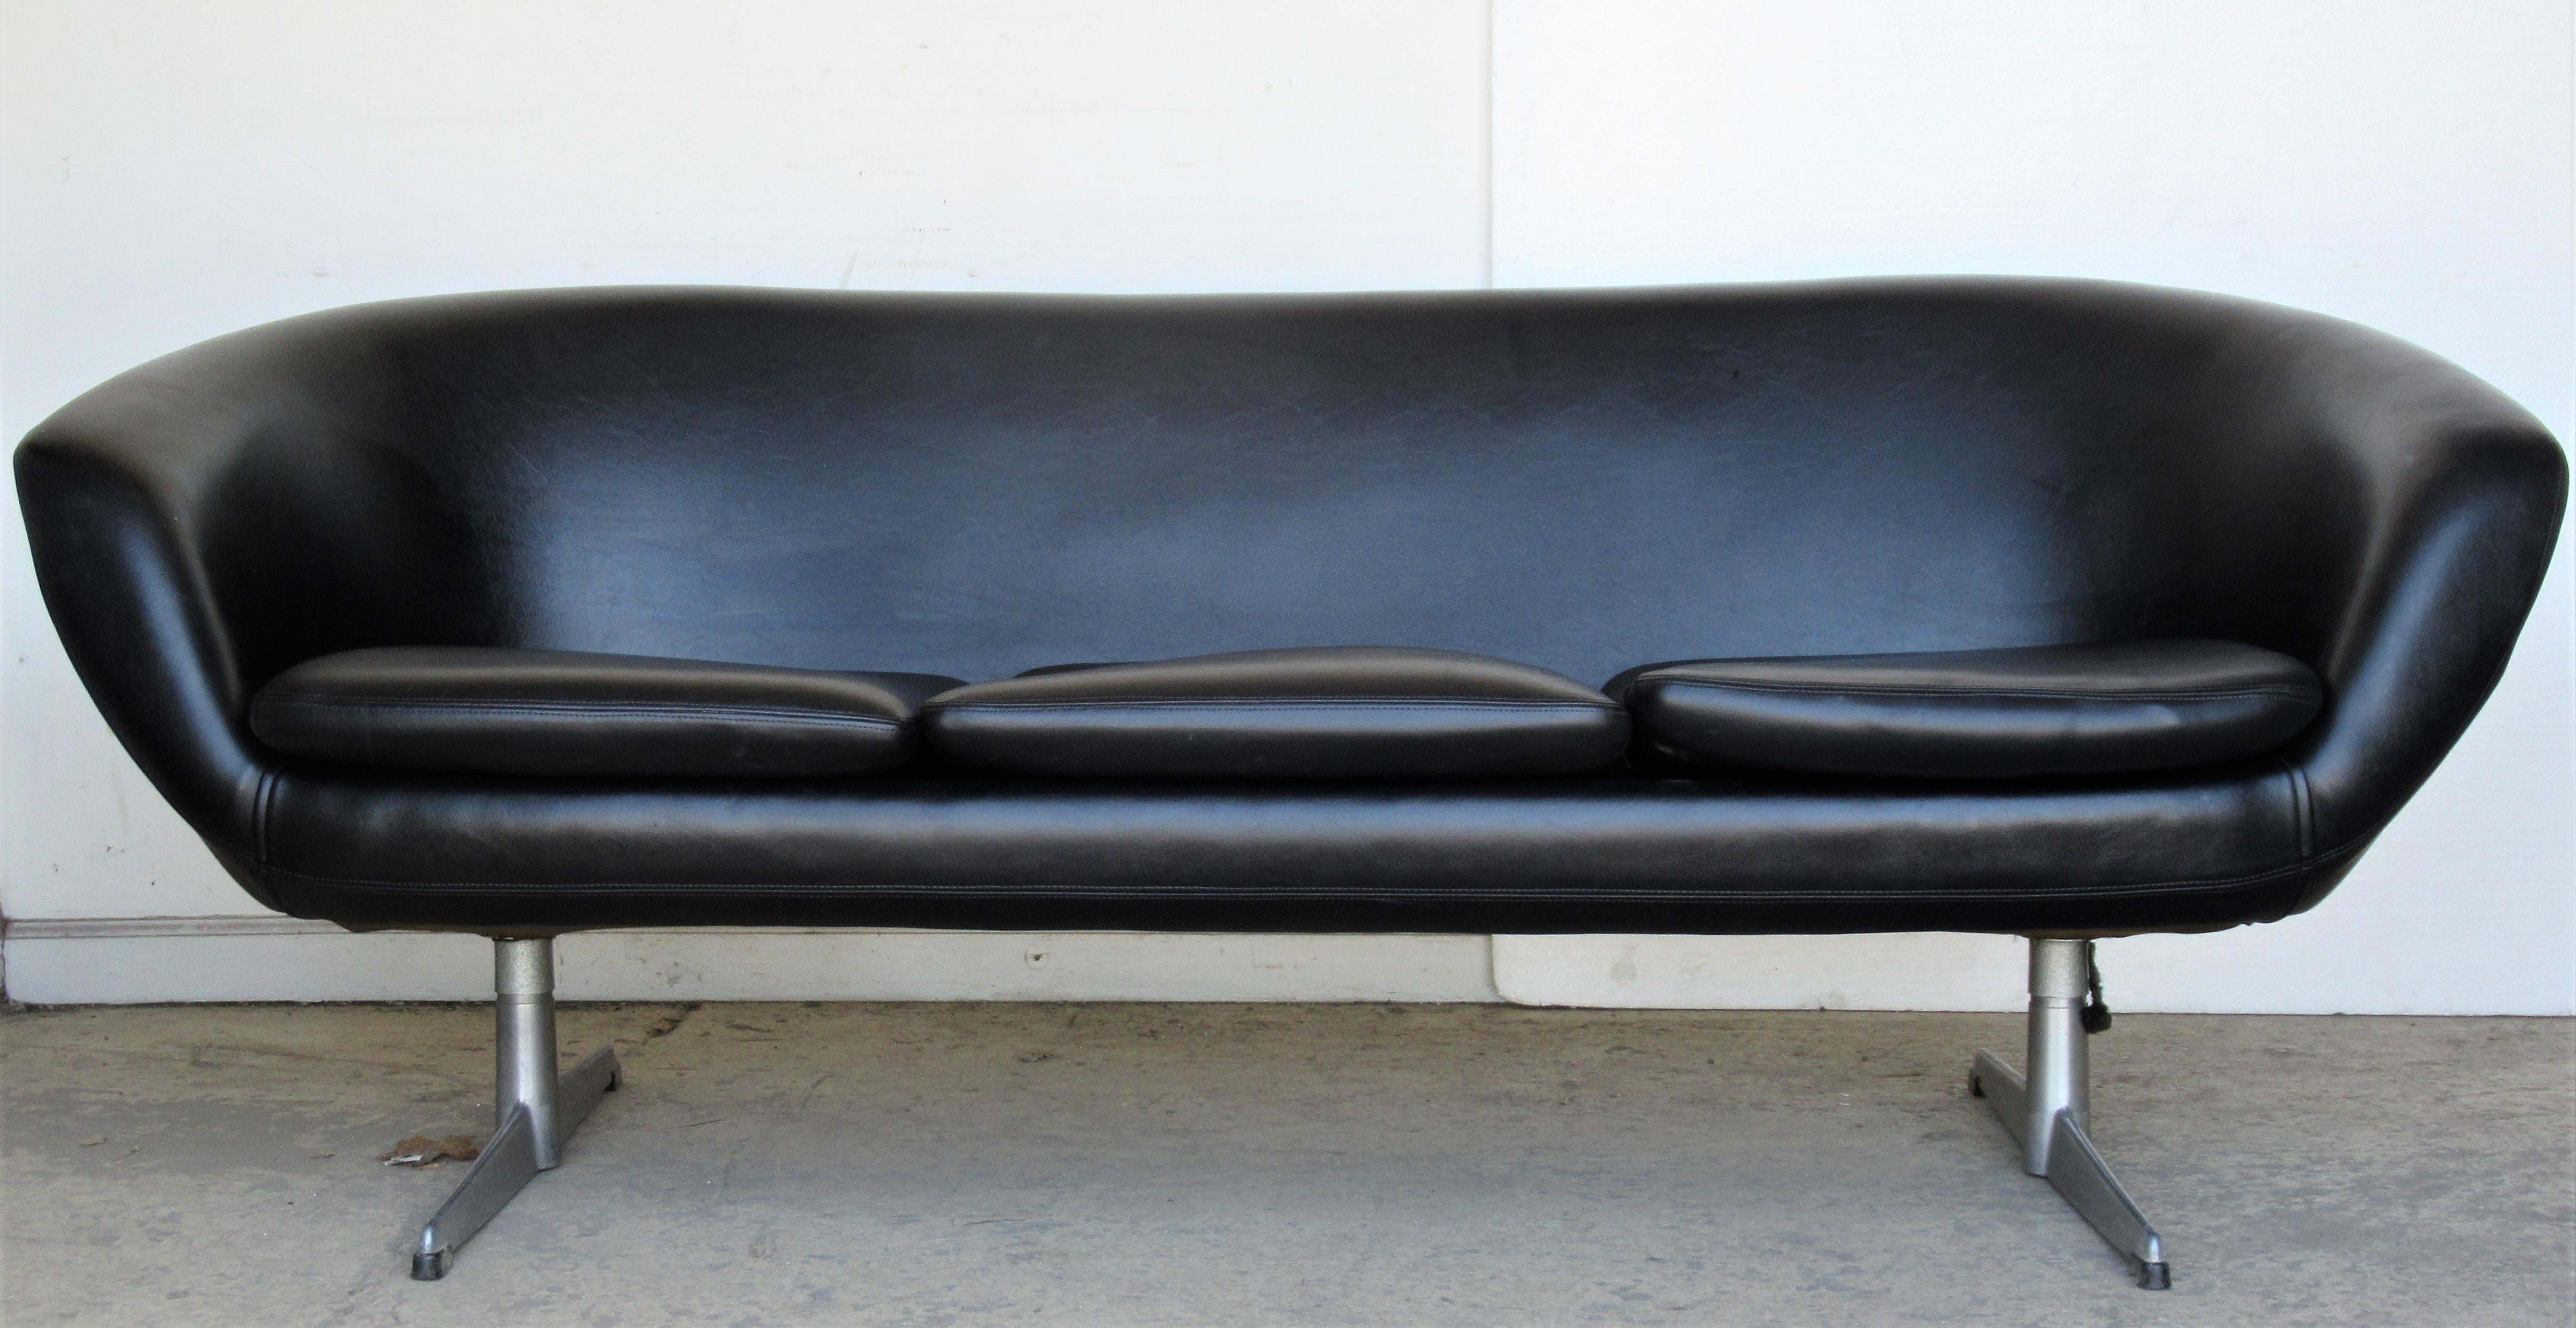 Modernist pod form three seat sofa with aluminum base by Overman, Sweden, circa 1960. The sofa is in very good all original condition retaining the stitched black leather like vinyl upholstery. Look at all pictures and read condition report in